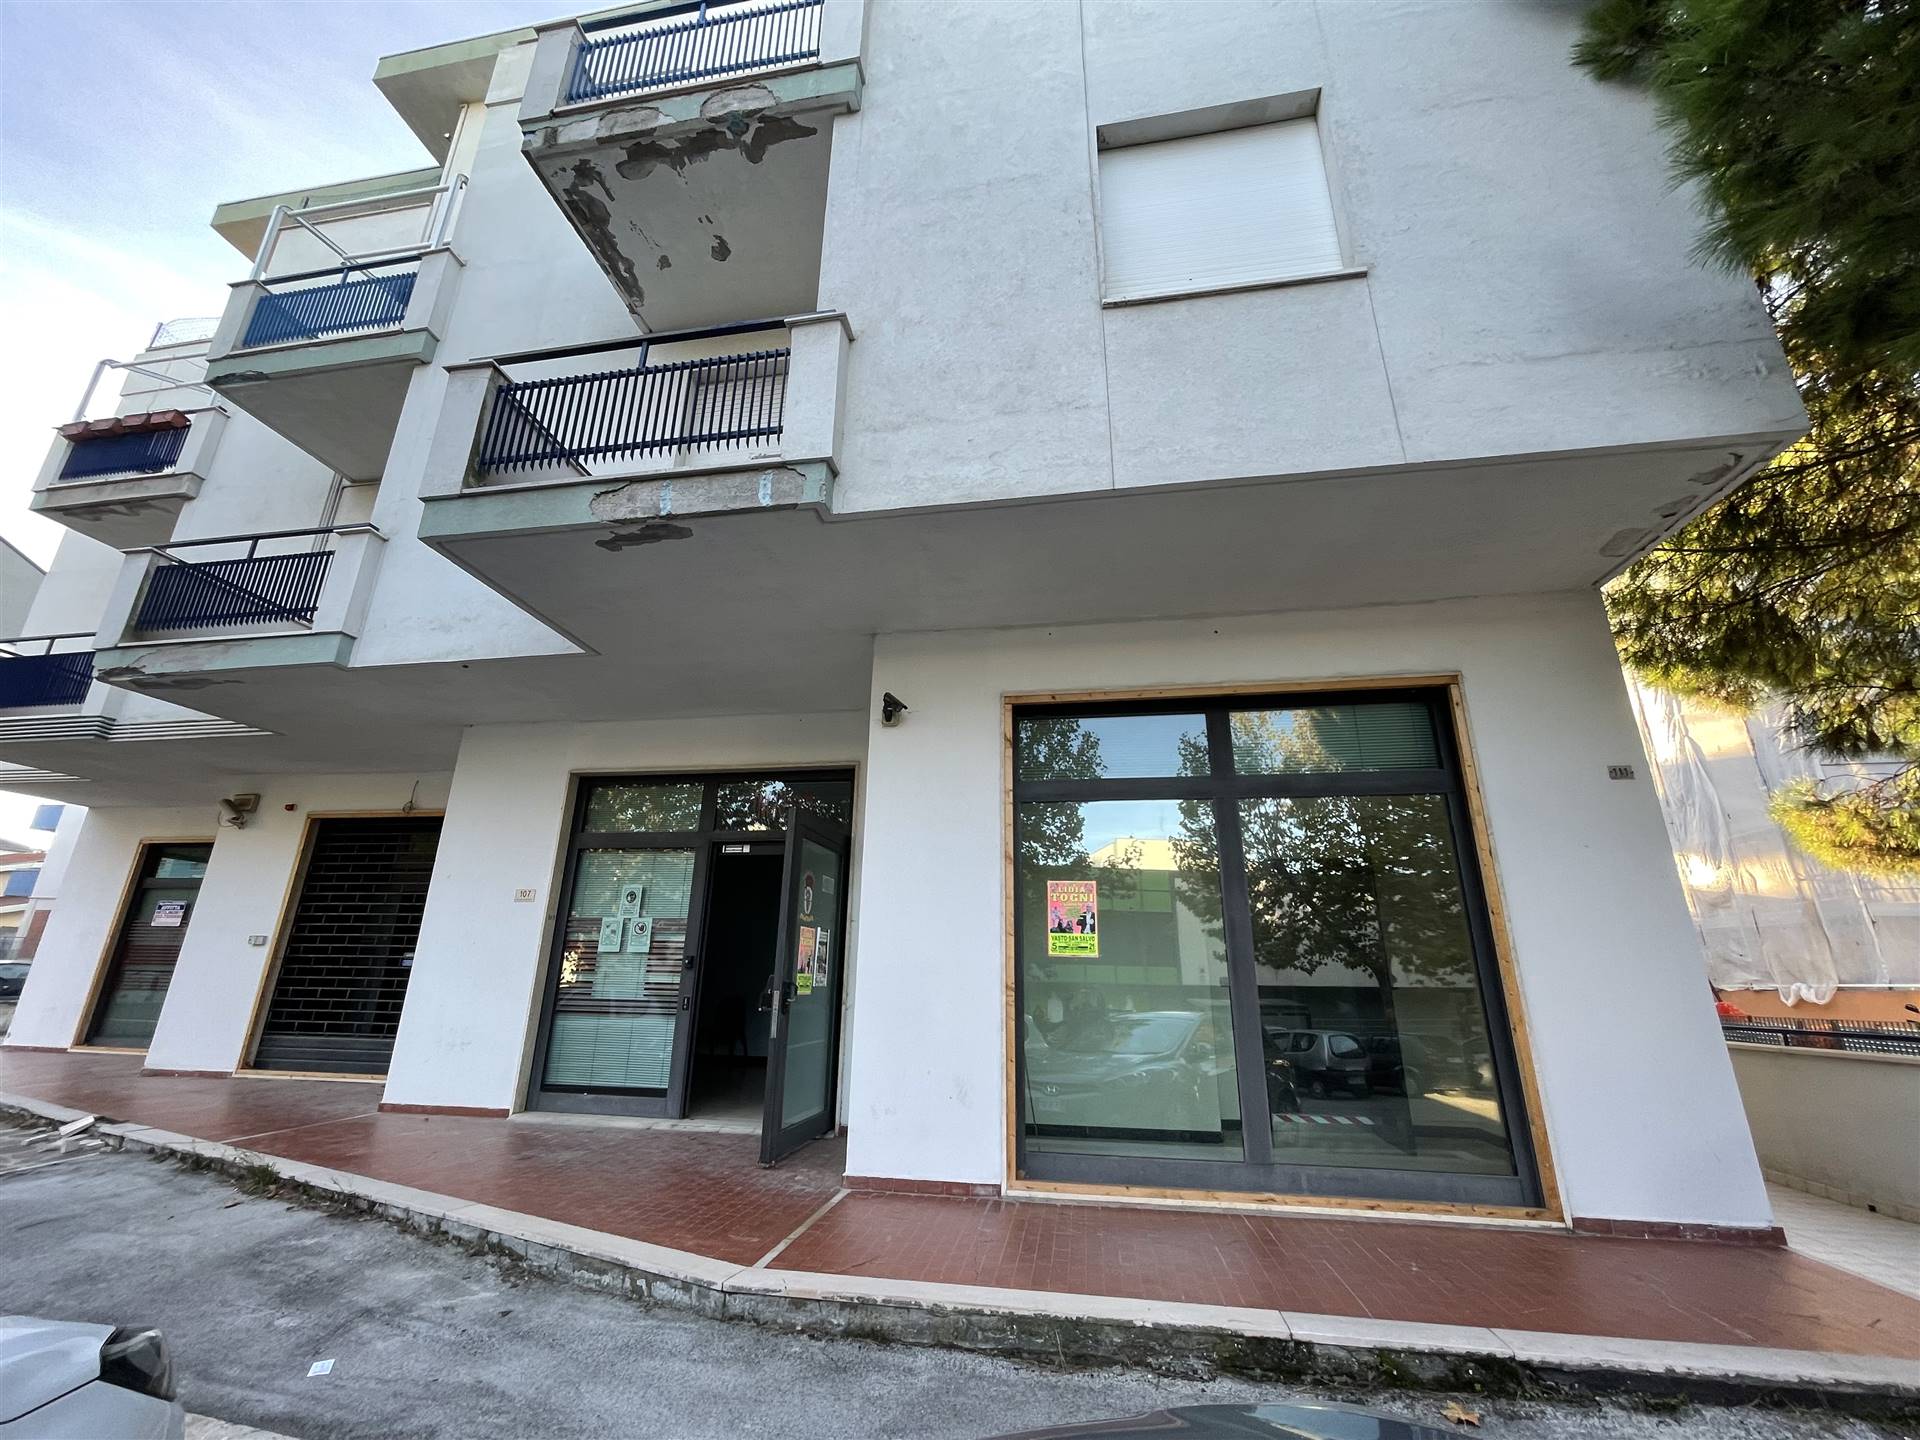 SEMICENTRO, VASTO, Commercial property for rent of 490 Sq. mt., Restored, Heating Individual heating system, Energetic class: G, Epi: 0 kwh/m3 year, 